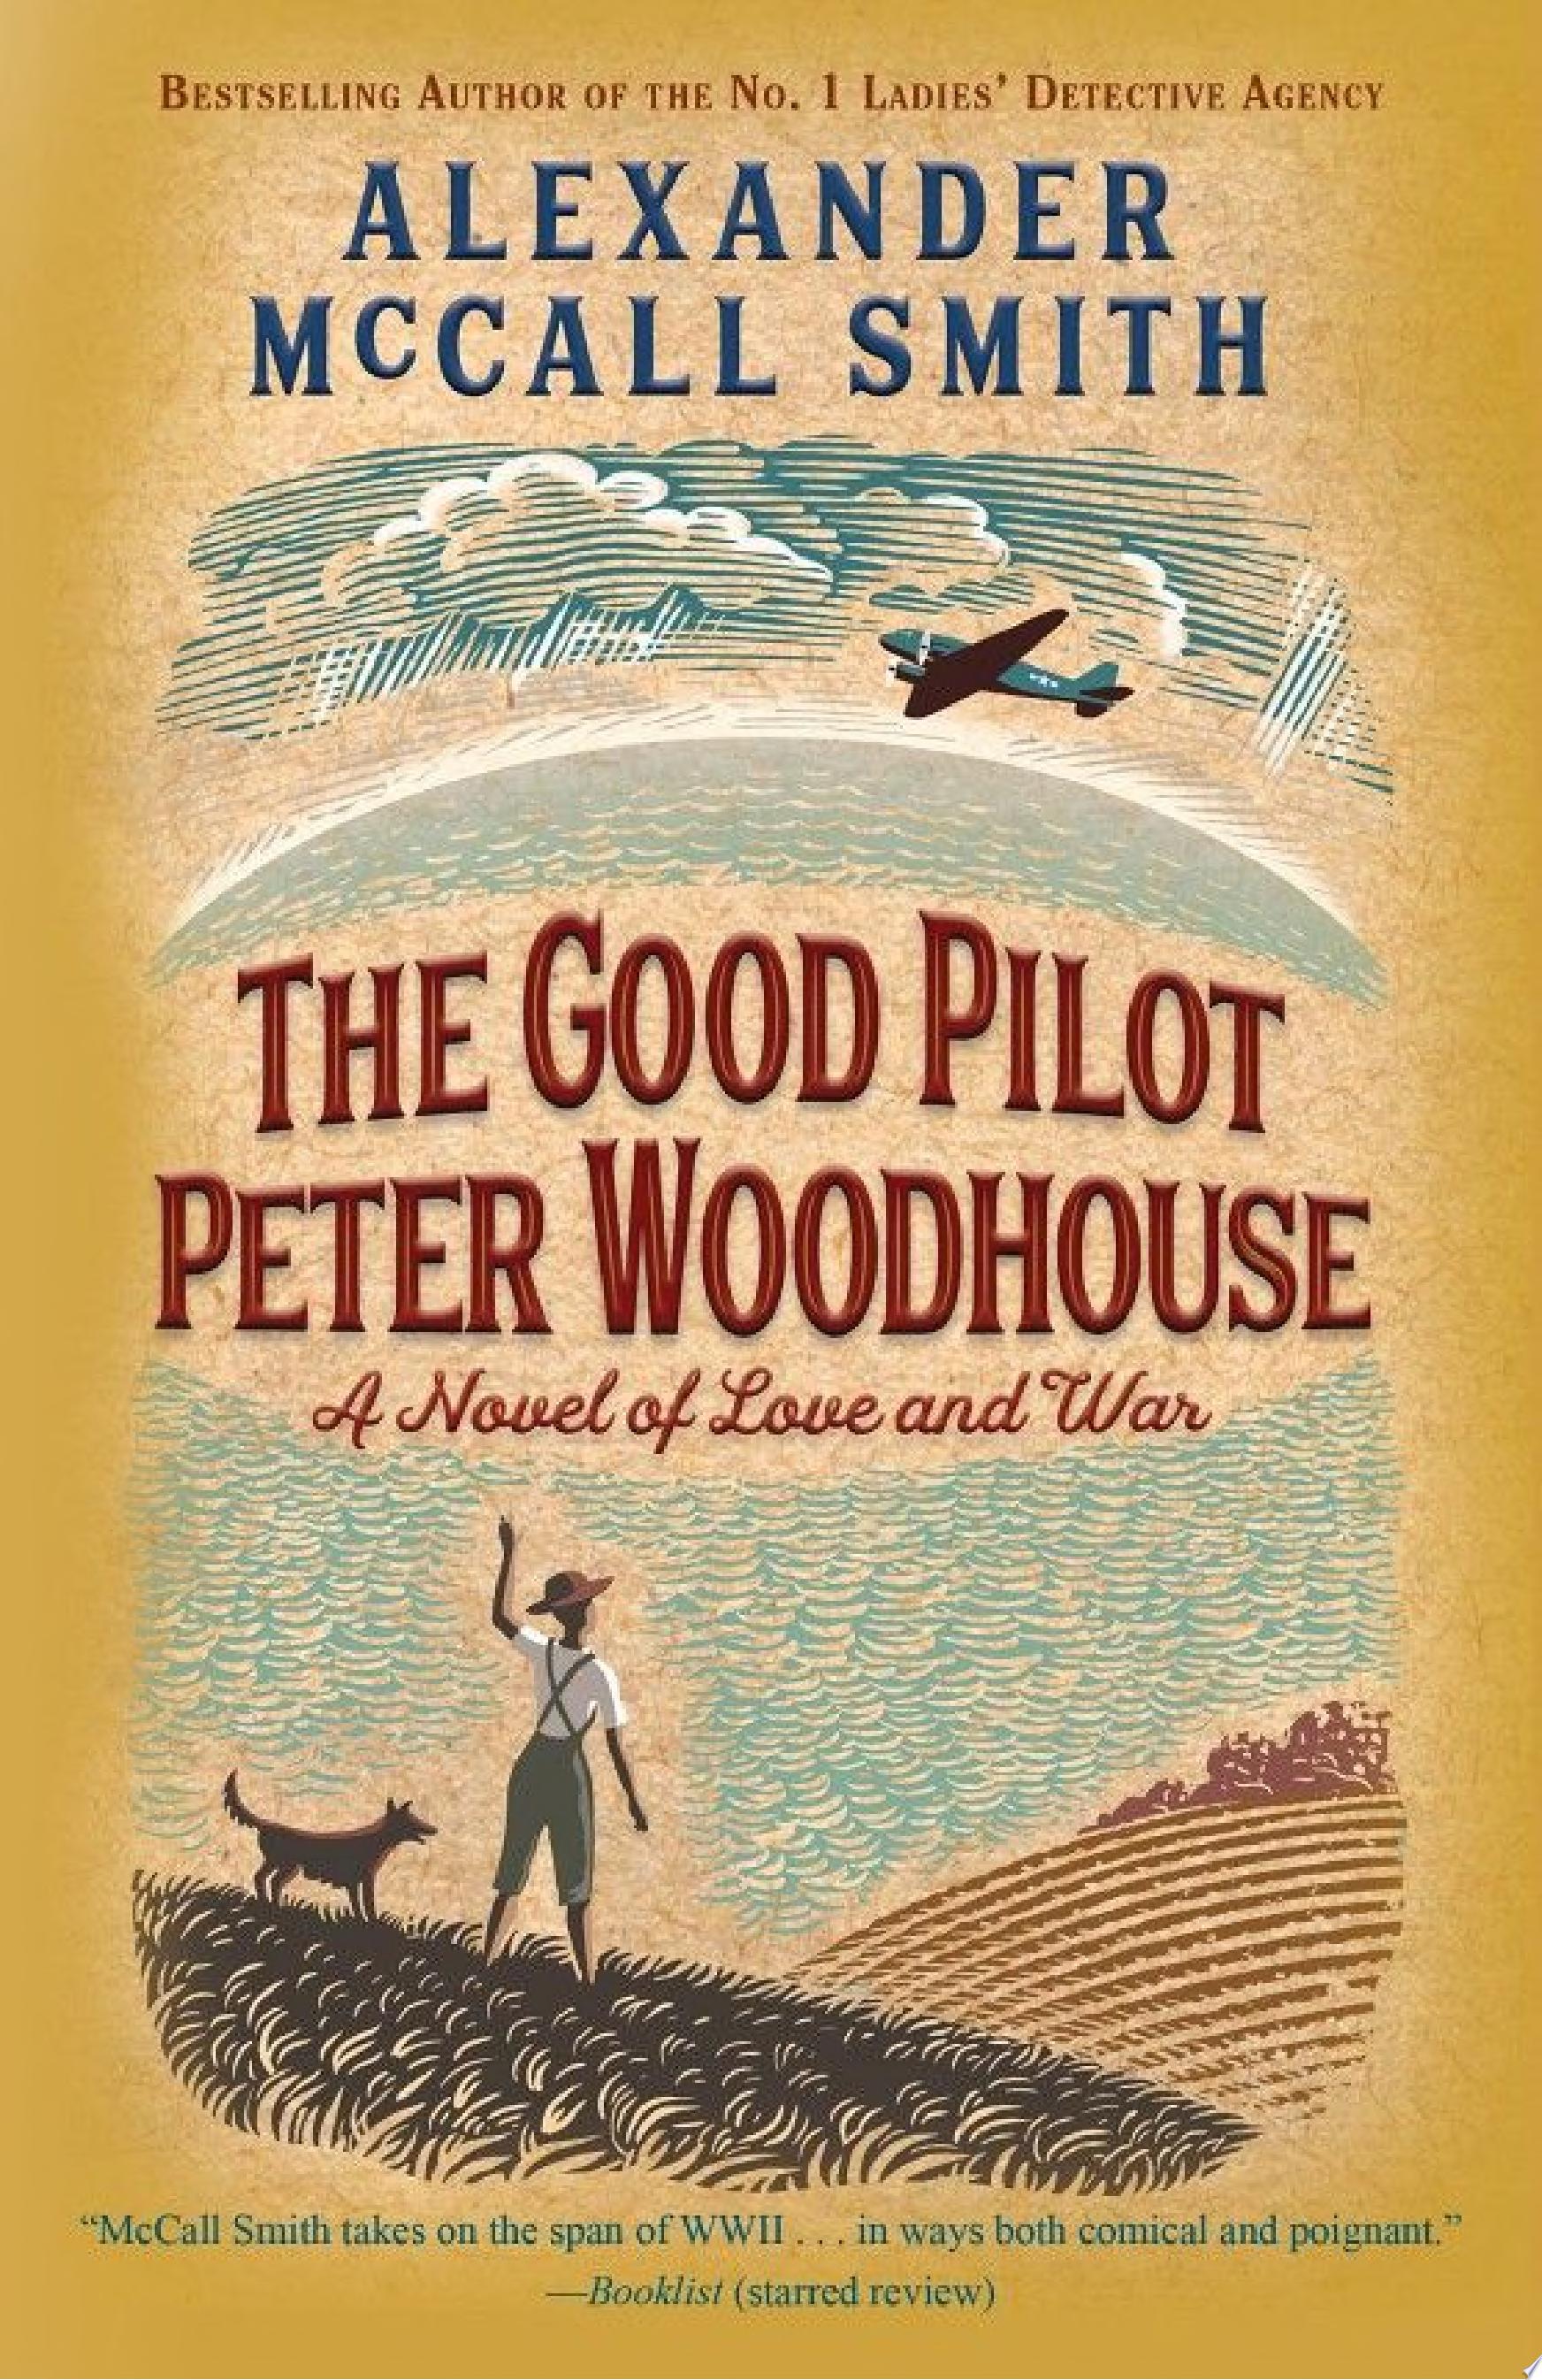 Image for "The Good Pilot Peter Woodhouse"